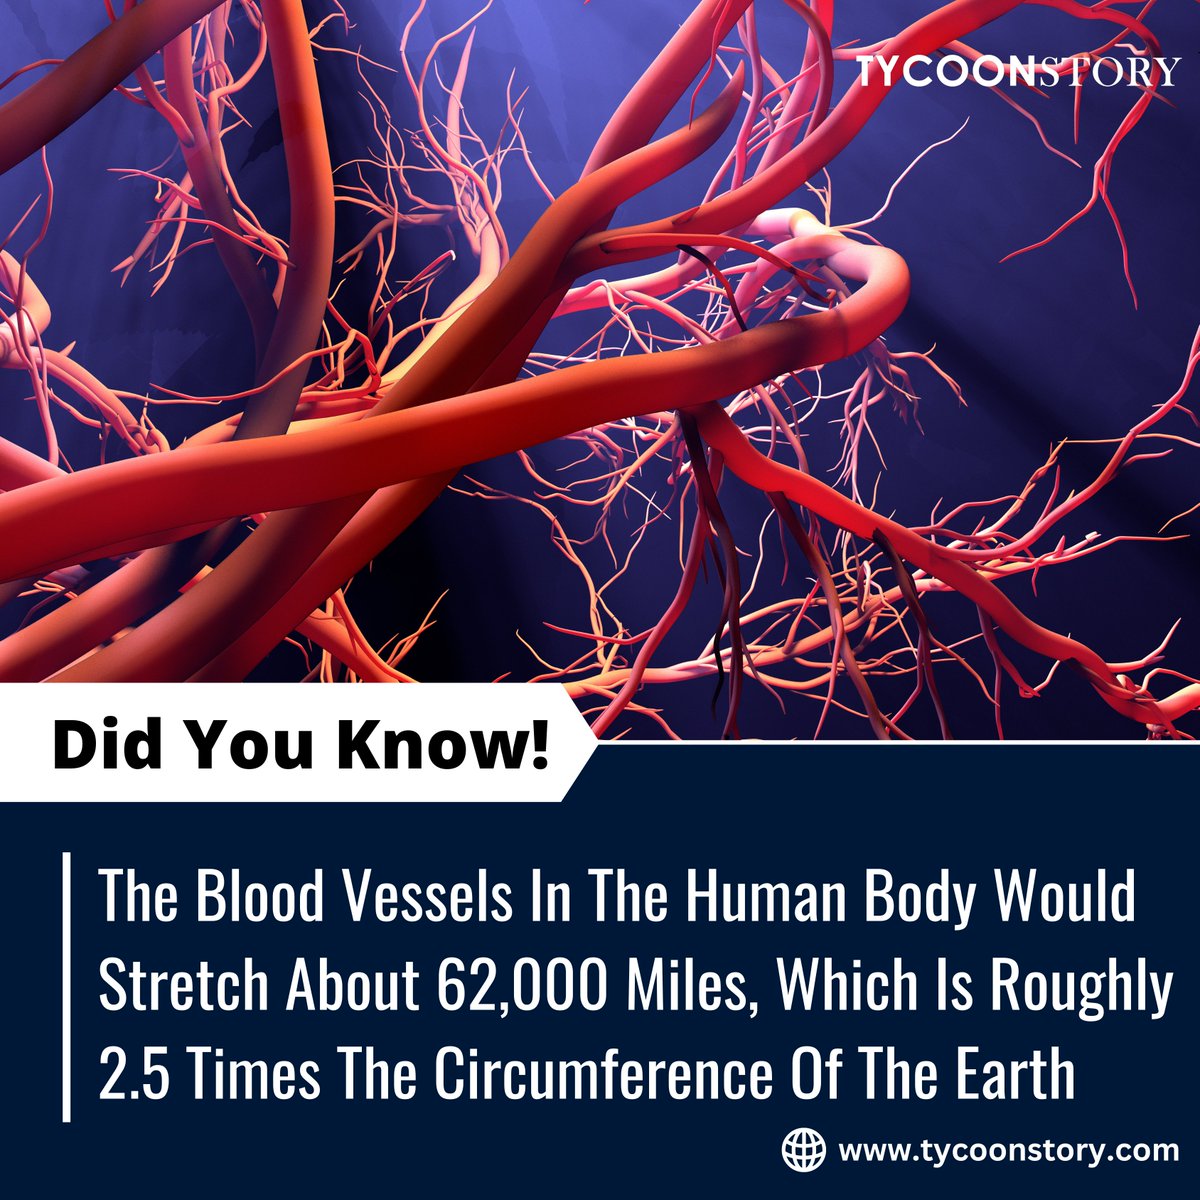 Human Blood Vessels: Earth-Wrapping Wonders

#HealthFacts #AnatomyTrivia #AmazingBody #DidYouKnow #FunFacts #BodyFascinatio #HumanBody #BloodVesselFacts @TycoonStoryCo @tycoonstory2020 @LiveScience @myToppr @ClevelandClinic